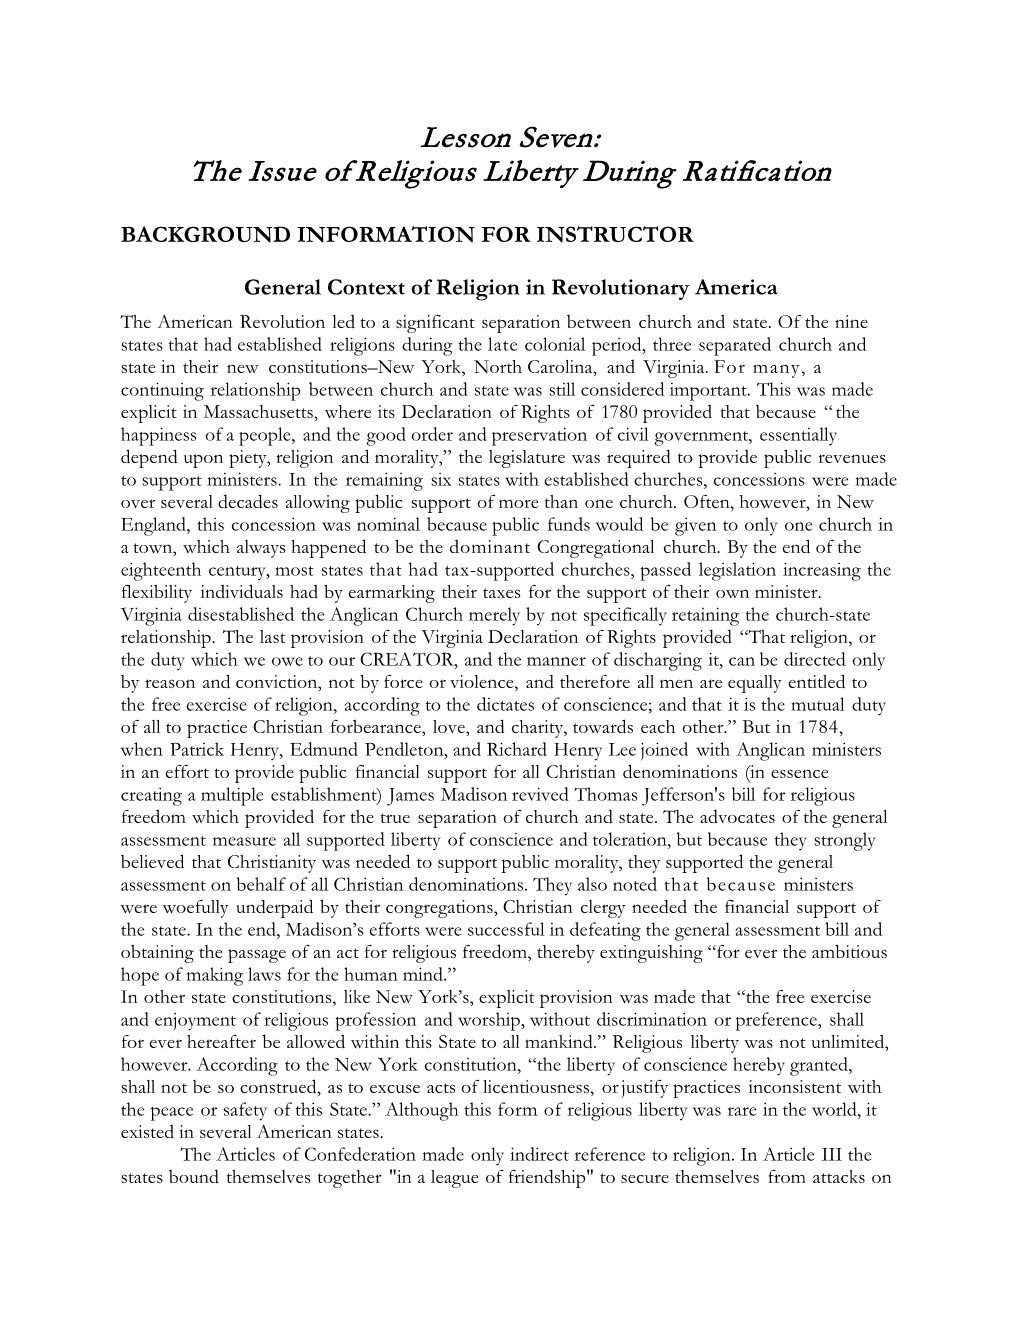 Lesson Seven: the Issue of Religious Liberty During Ratification